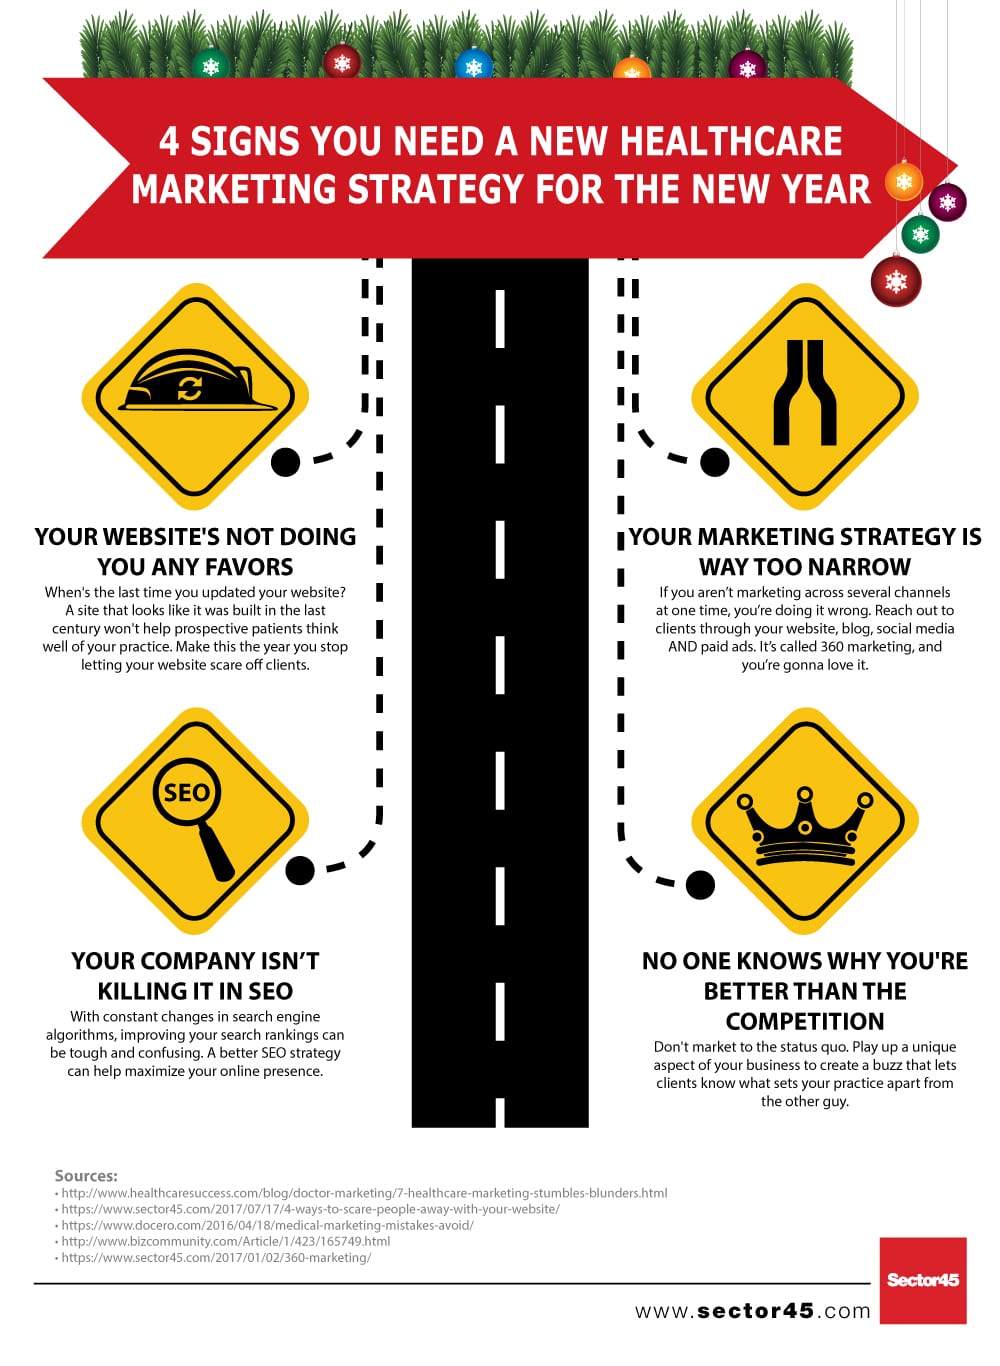 4 Signs You Need a New Healthcare Marketing Strategy for the New Year 